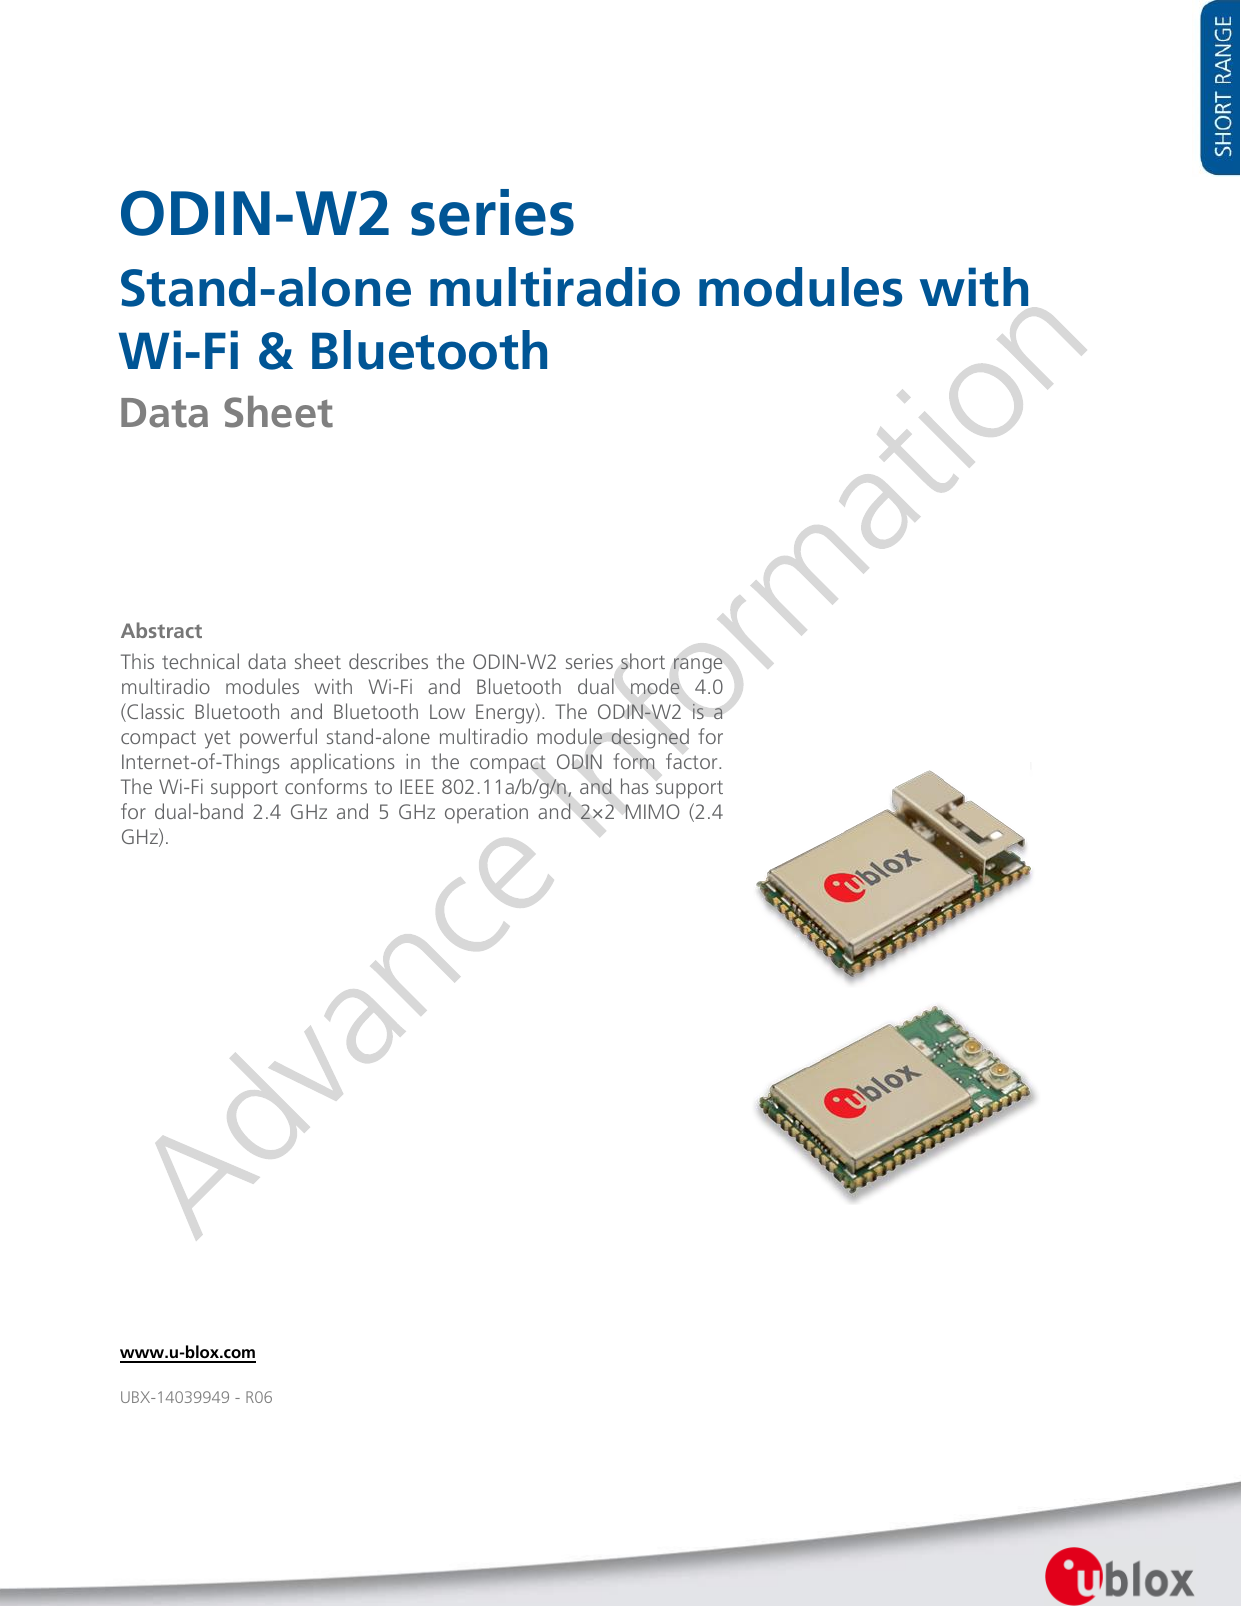    ODIN-W2 series Stand-alone multiradio modules with Wi-Fi &amp; Bluetooth Data Sheet                          Abstract This technical data sheet describes the ODIN-W2 series short range multiradio  modules  with  Wi-Fi  and  Bluetooth  dual  mode  4.0 (Classic  Bluetooth  and  Bluetooth  Low  Energy).  The  ODIN-W2  is  a compact yet powerful stand-alone multiradio module designed for Internet-of-Things  applications  in  the  compact  ODIN  form  factor. The Wi-Fi support conforms to IEEE 802.11a/b/g/n, and has support for dual-band 2.4 GHz  and 5 GHz  operation and 2×2 MIMO (2.4 GHz). www.u-blox.com UBX-14039949 - R06 